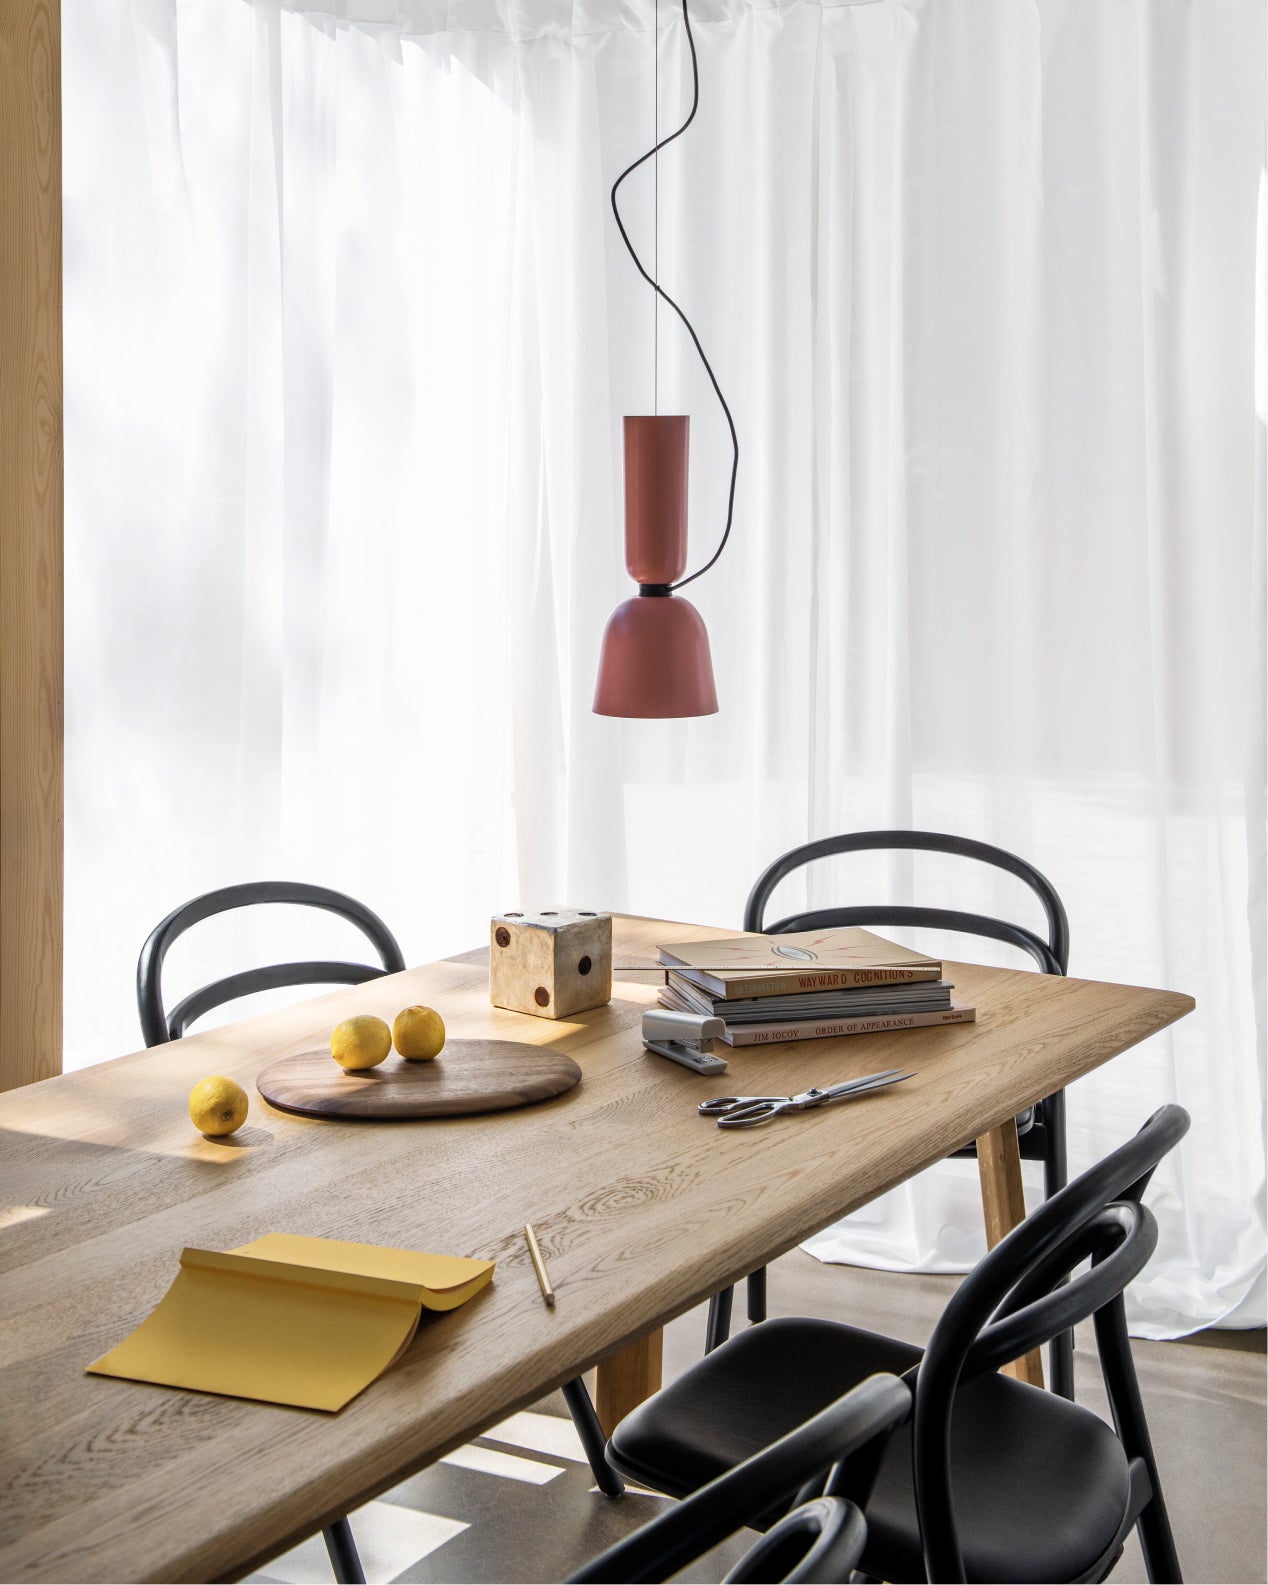 Hem - A dining scene featuring Alphabeta Pendant Light, Alle Table, and Udon Upholstered Chairs.